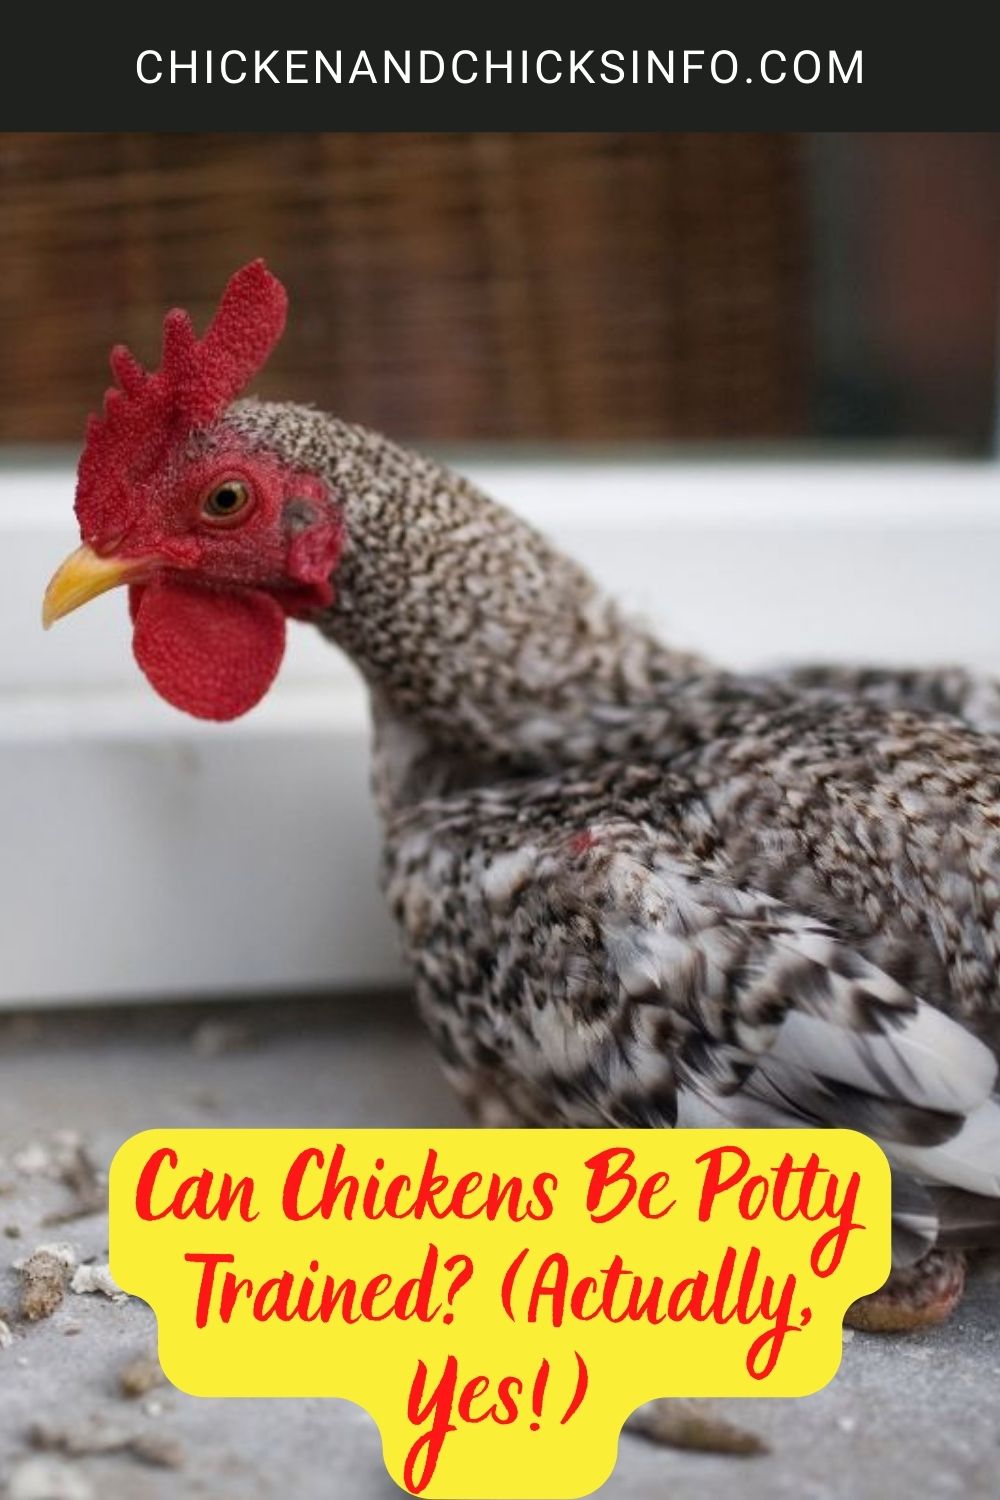 Can Chickens Be Potty Trained (Actually, Yes!) poster.
